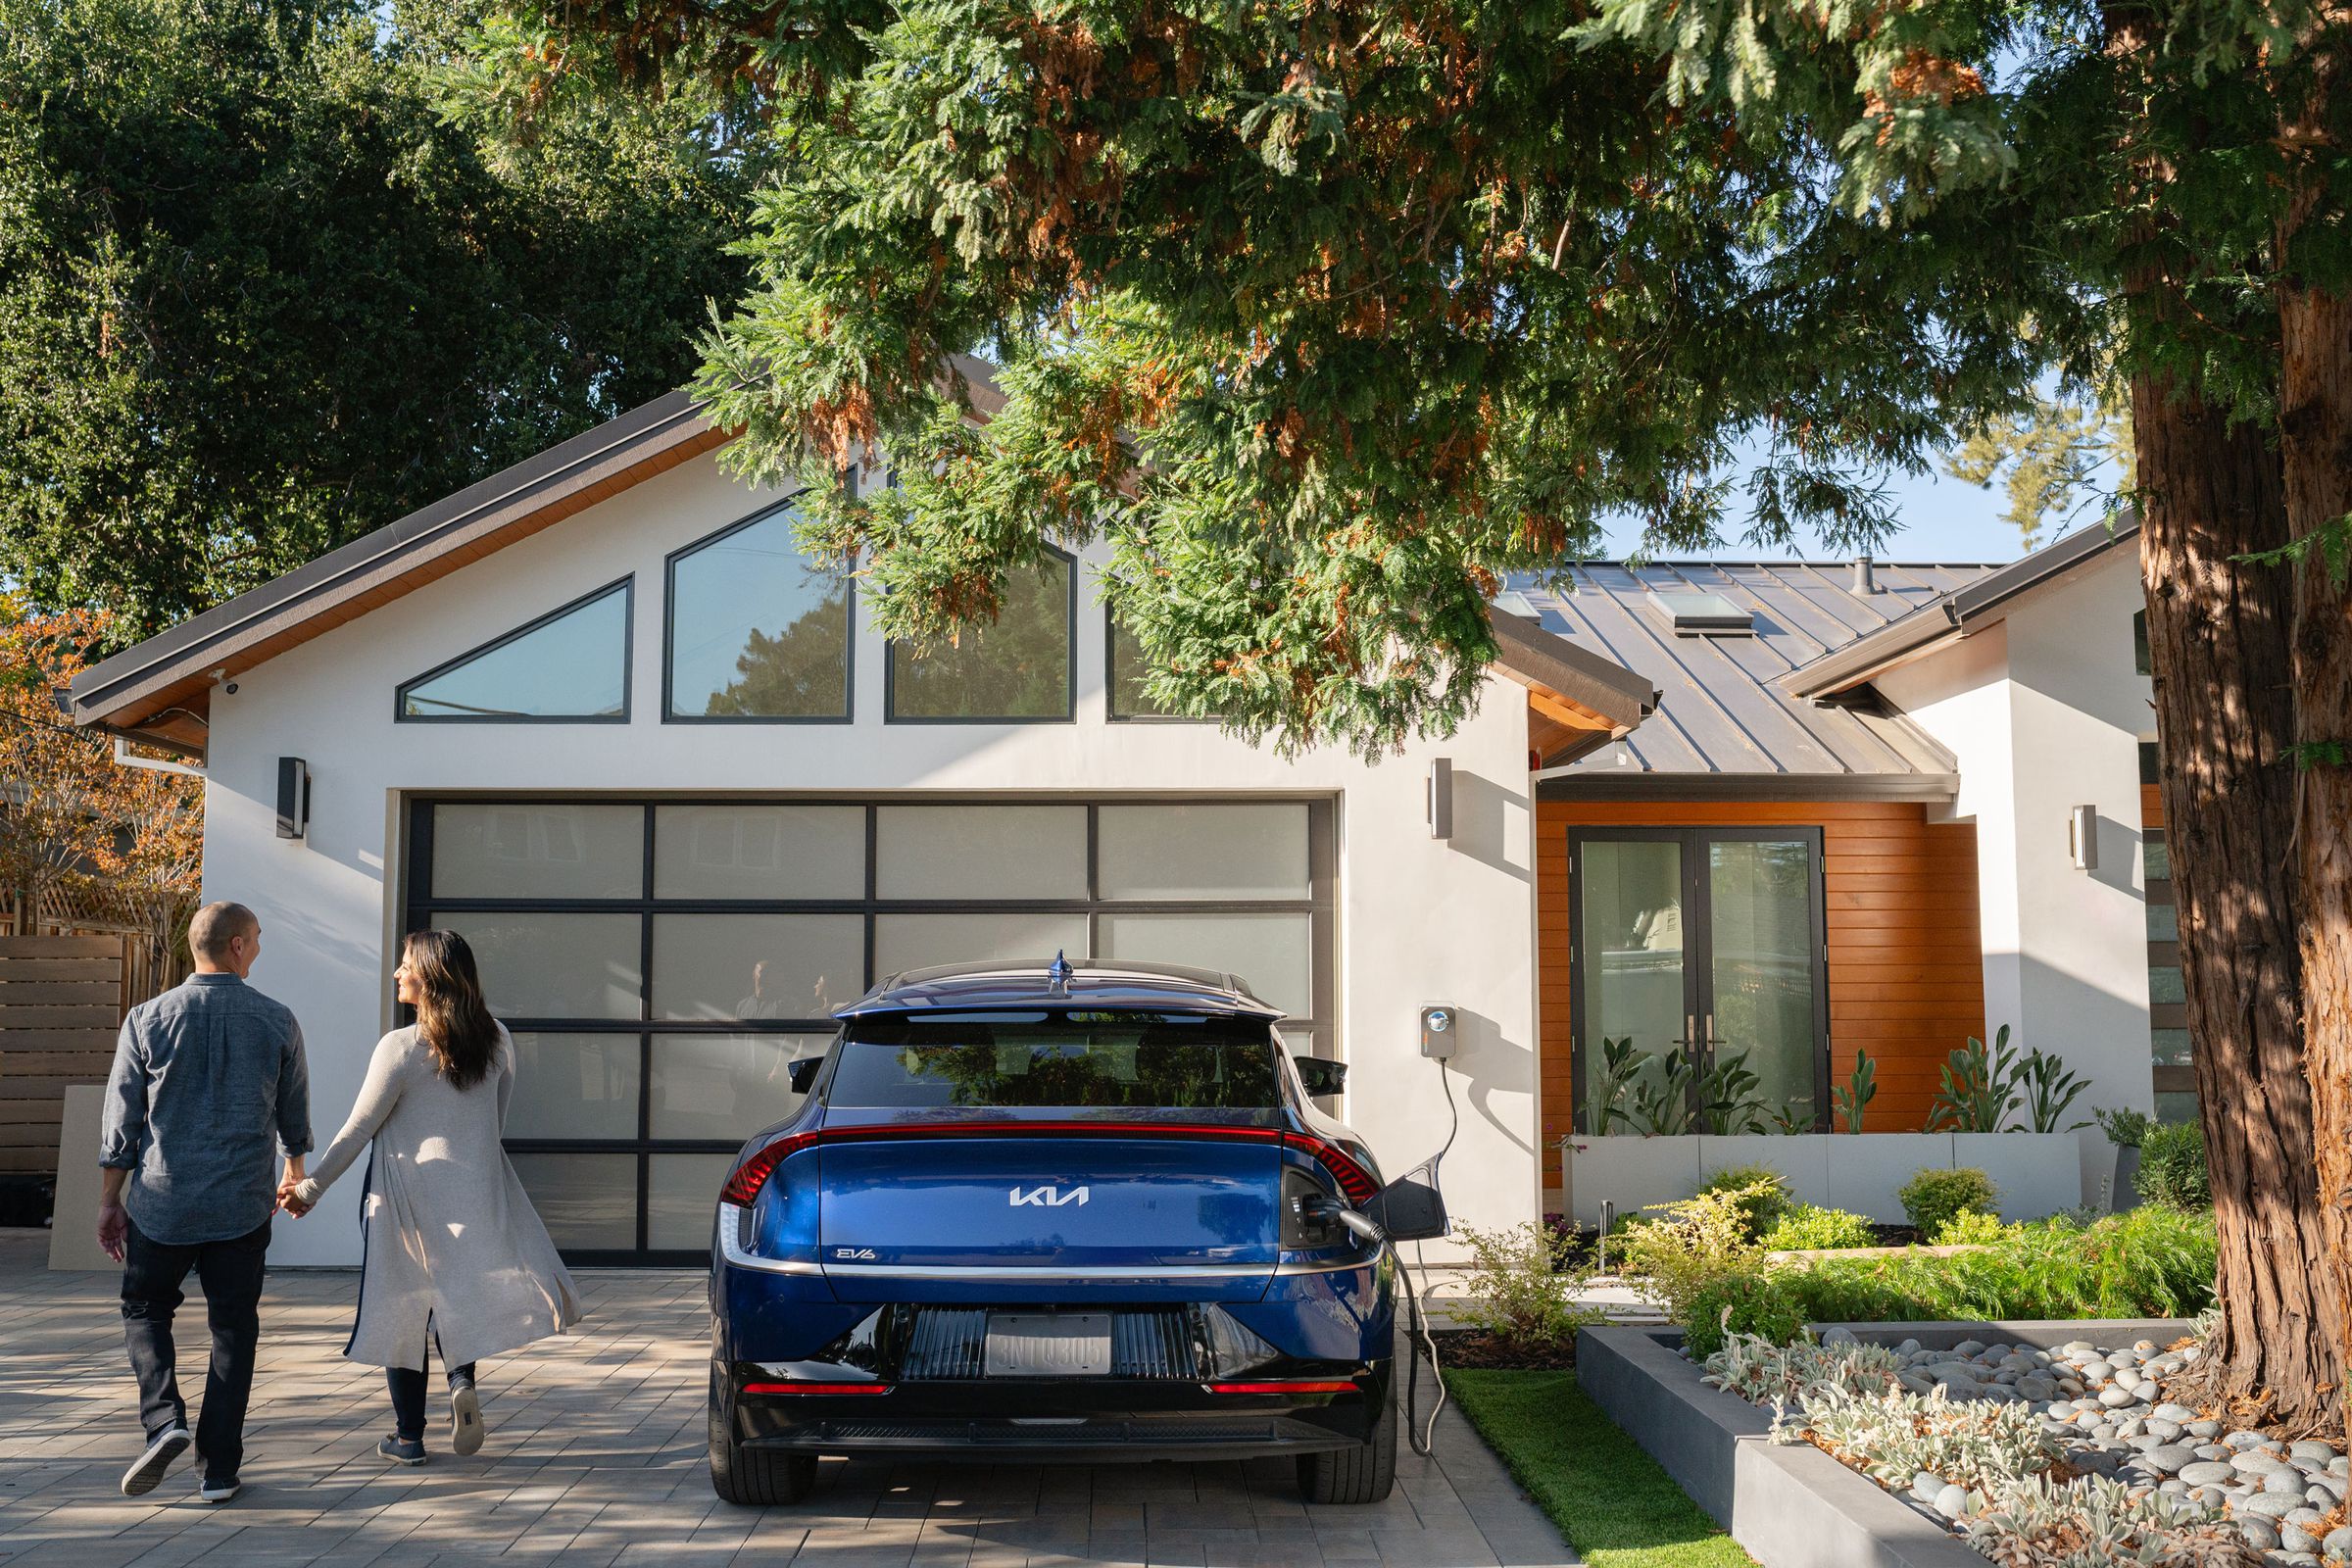 modern house with blue kia ev6 parked in front of garage with charge point charger Hooked up, and two people holding hands walking away from the car